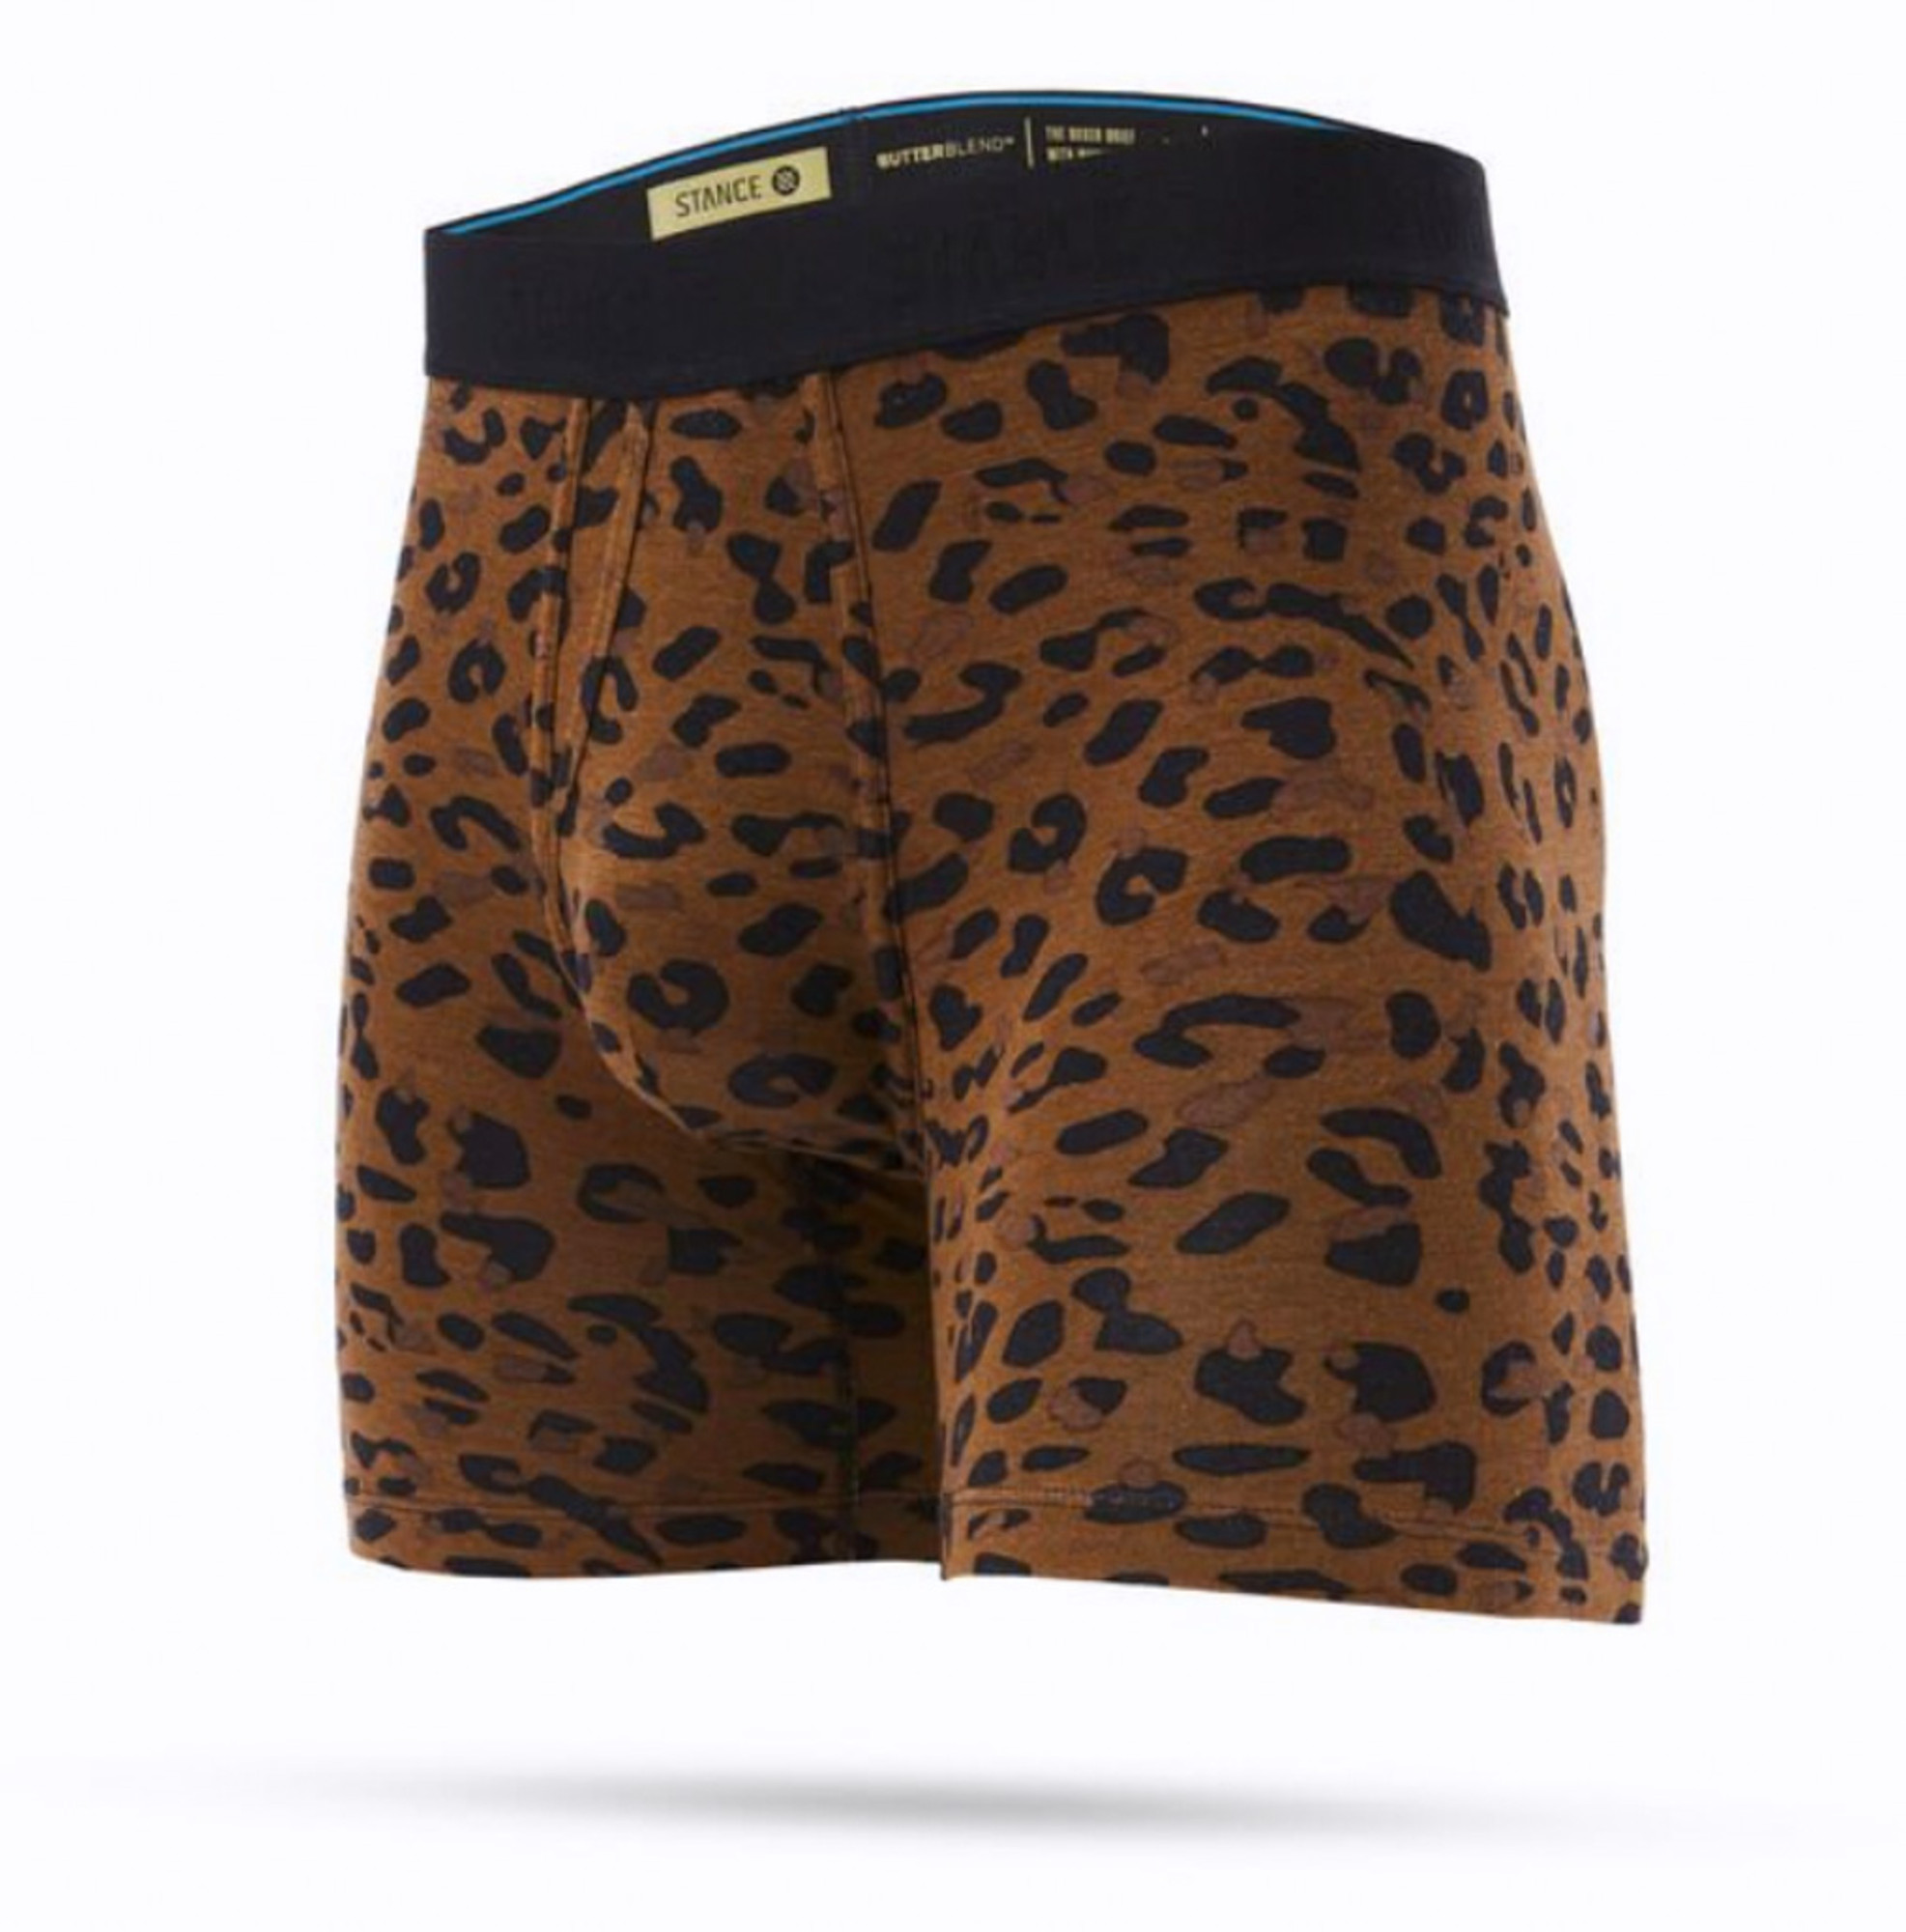 STANCE - Butter Blend Boxer Brief w/ Wholester - Swankidays Camo